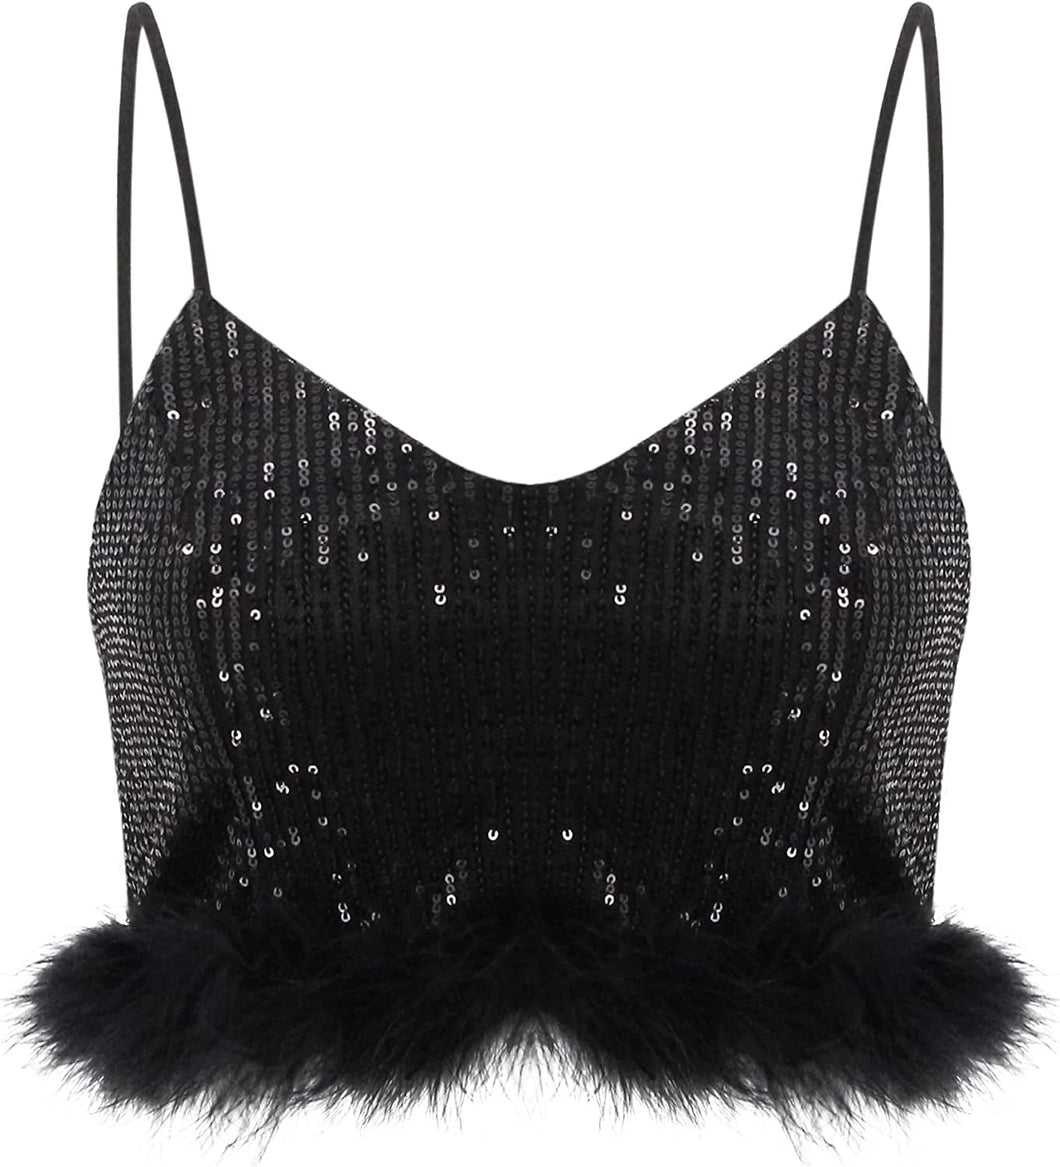 Passion Lea Black Sequin Feather Crop Top Strapless Tank Tops